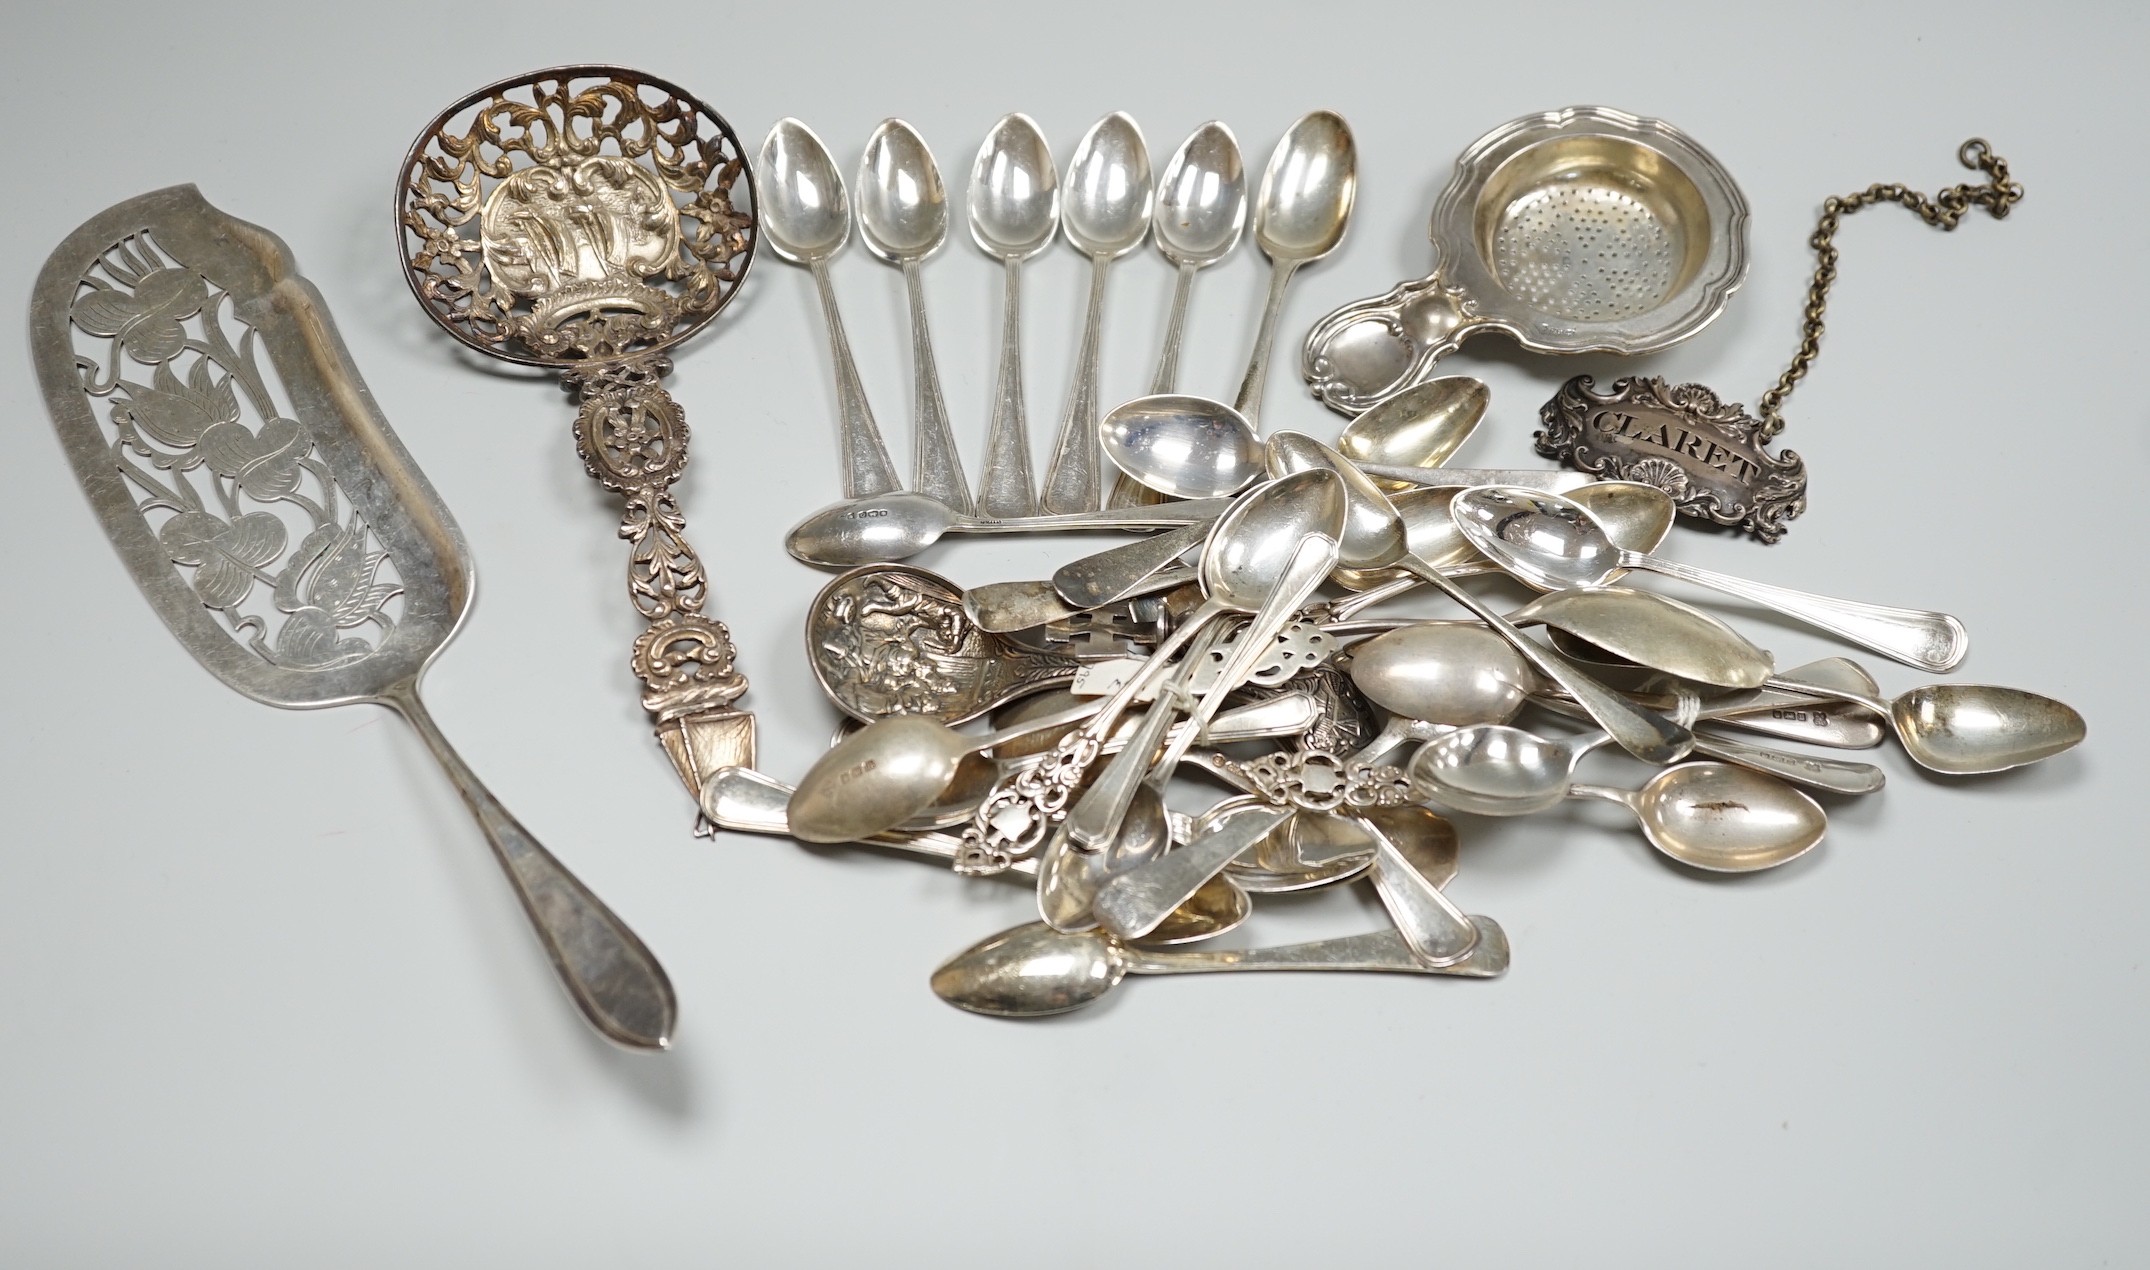 A group of mixed silver and white metal items including flatware, Dutch fish slice, German 800 tea strainer, George IV 'Claret' wine label, etc. and a plated spoon.